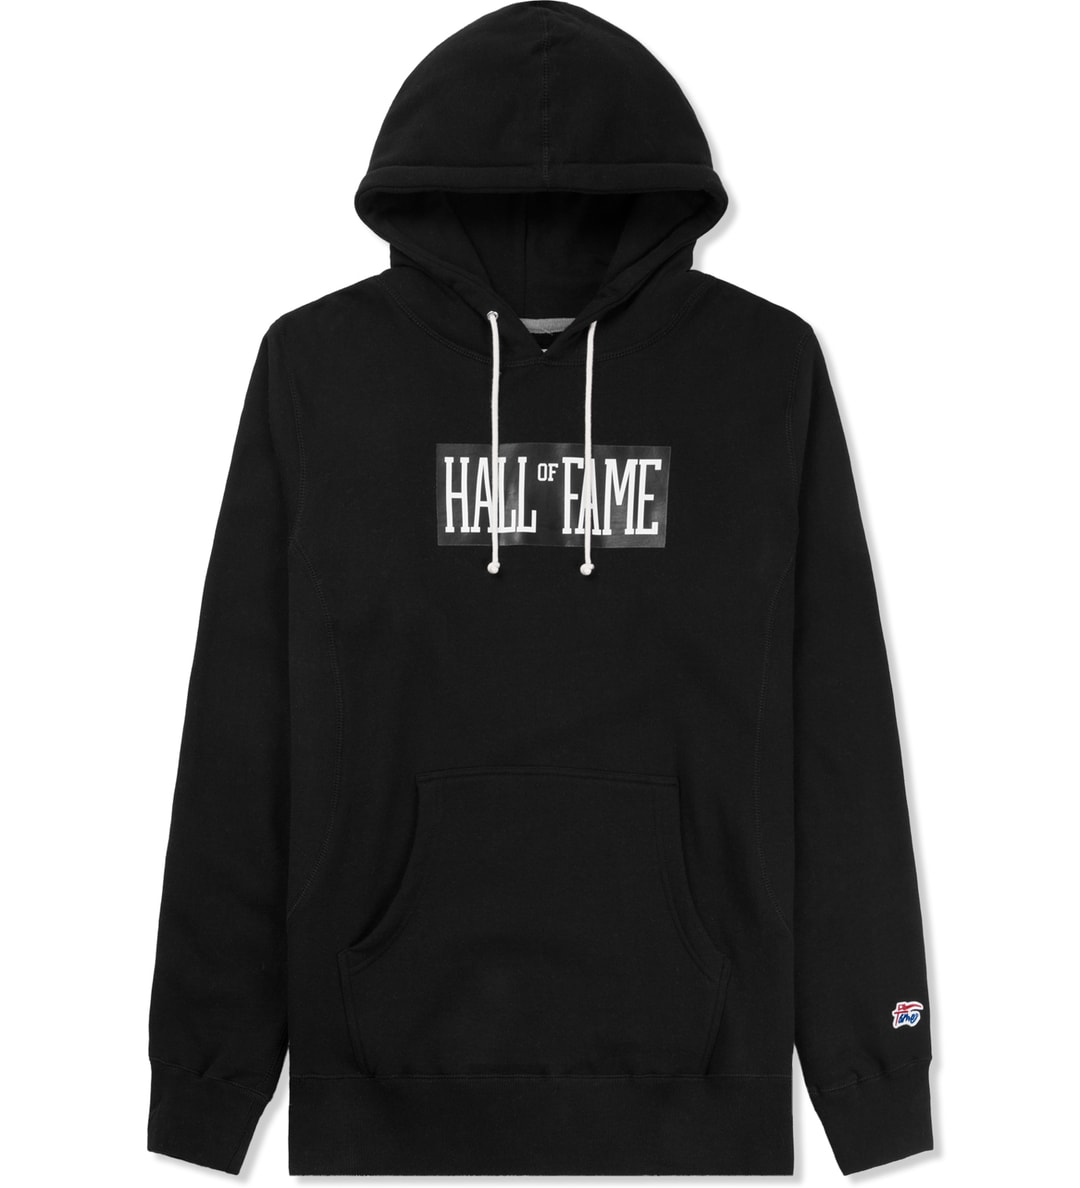 HALL OF FAME - Black Logo Hoodie | HBX - Globally Curated Fashion and ...